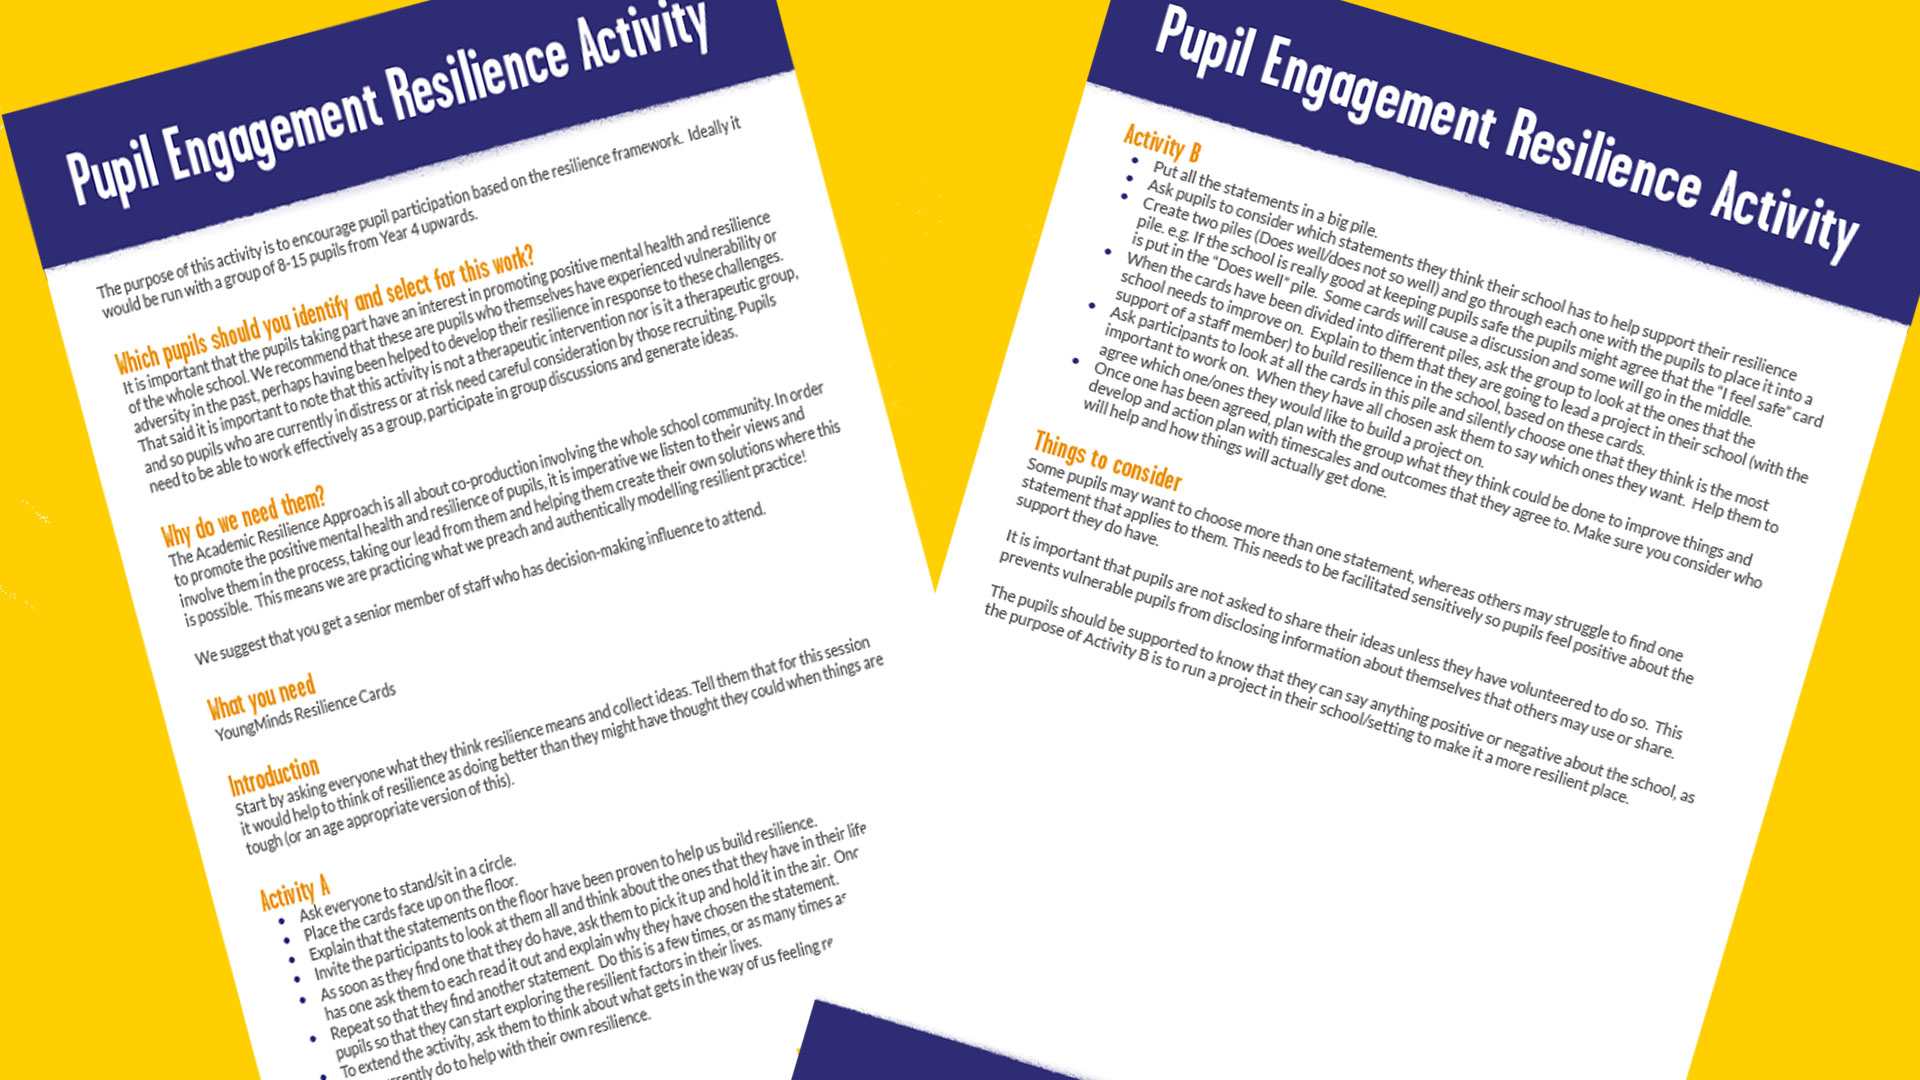 A screenshot of our pupil engagement resilience activity.